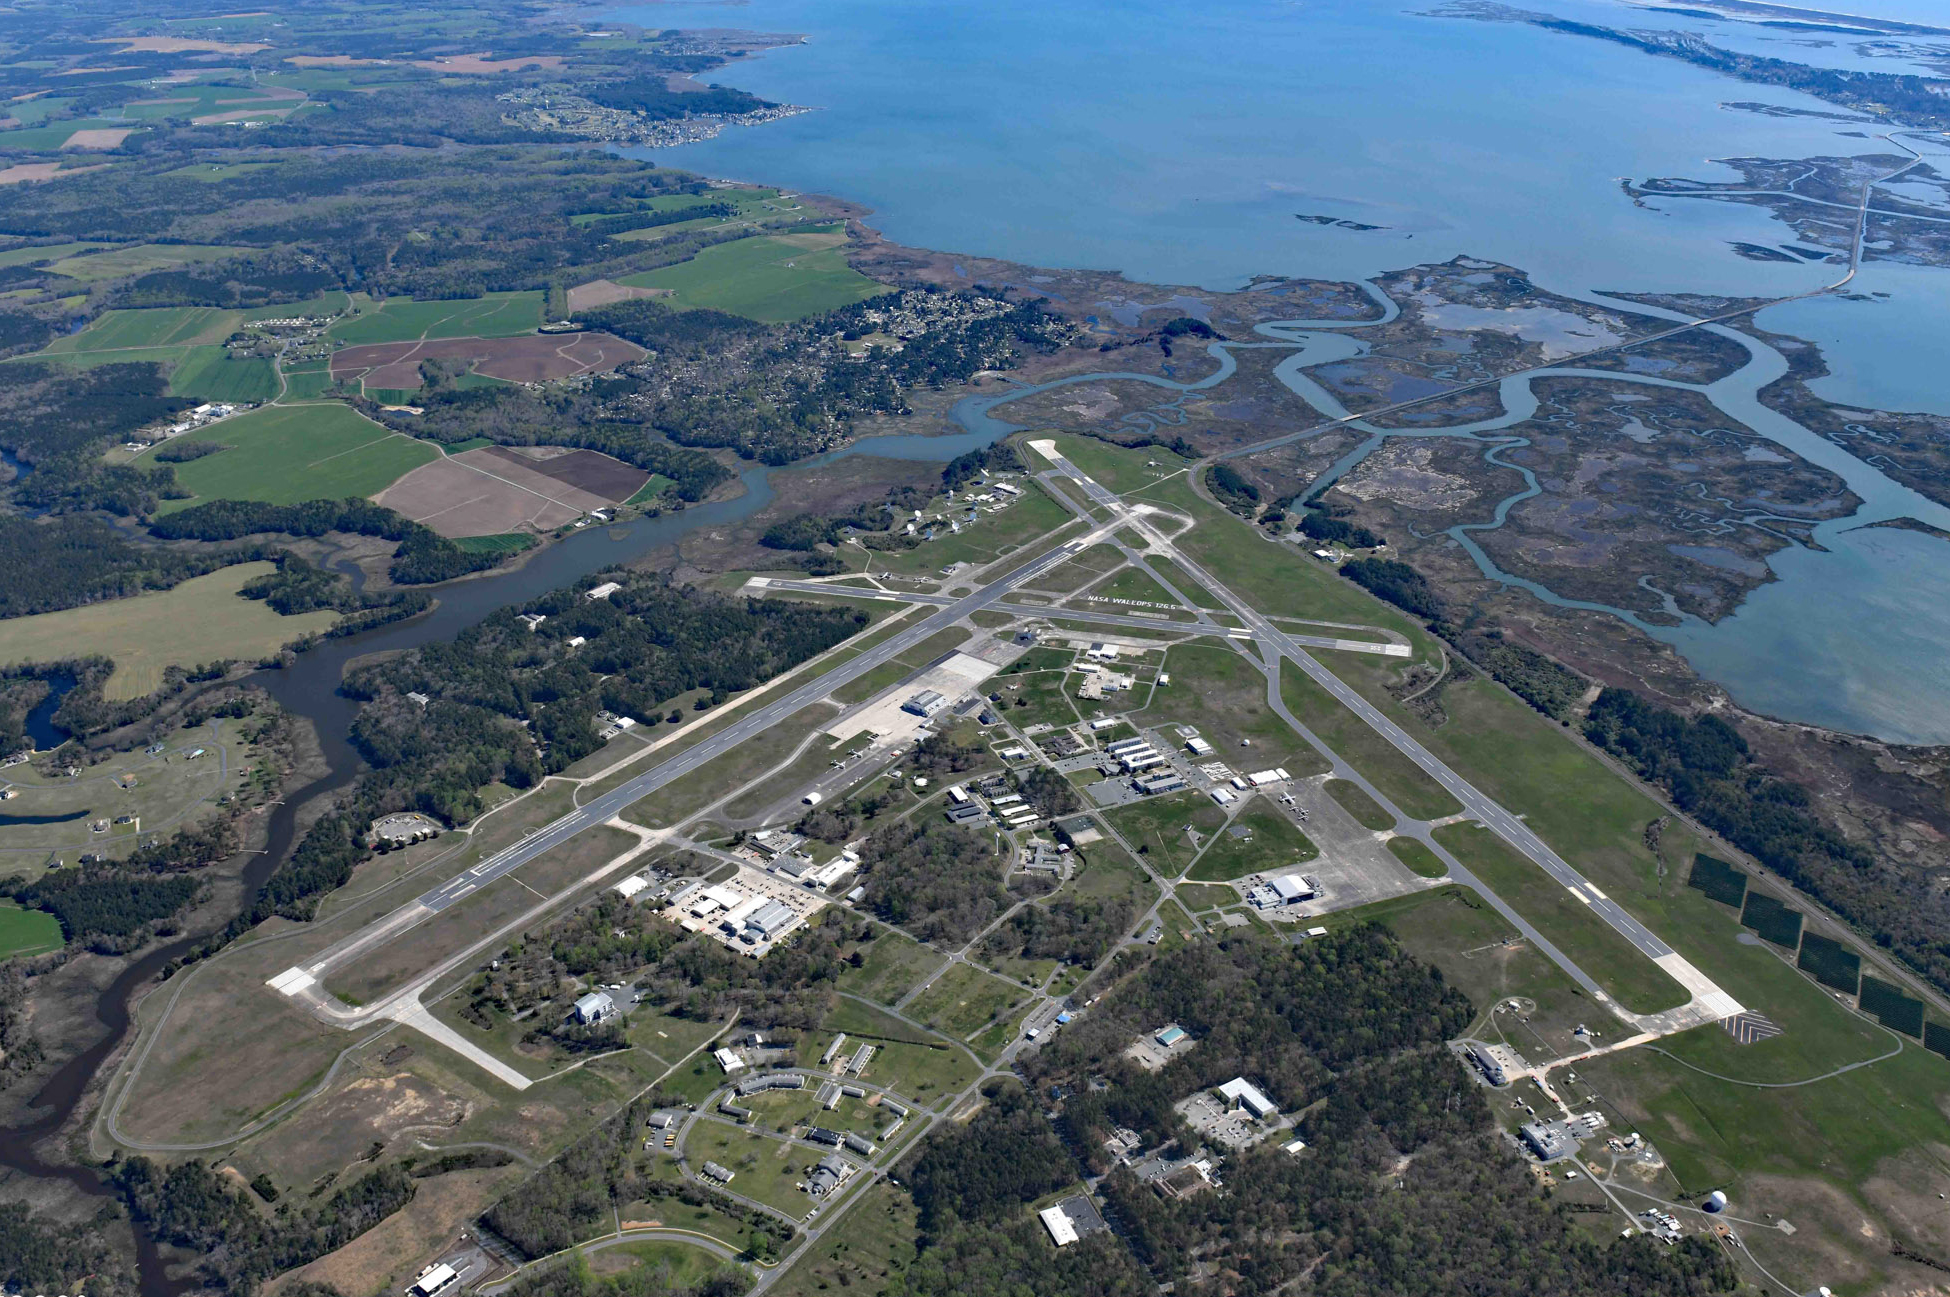 An aerial photo of Wallops Flight Facility, showing the center's airstrips, buildings, and parking lots with the Chesapeake Bay shining blue across the upper right corner of the image. The center has two perpendicular airstrips connected by a diagonal taxi strip, and these frame the buildings and parking lots in the center. Past the edges of the airstrip are trees, shoreline areas and dark, snaking water.